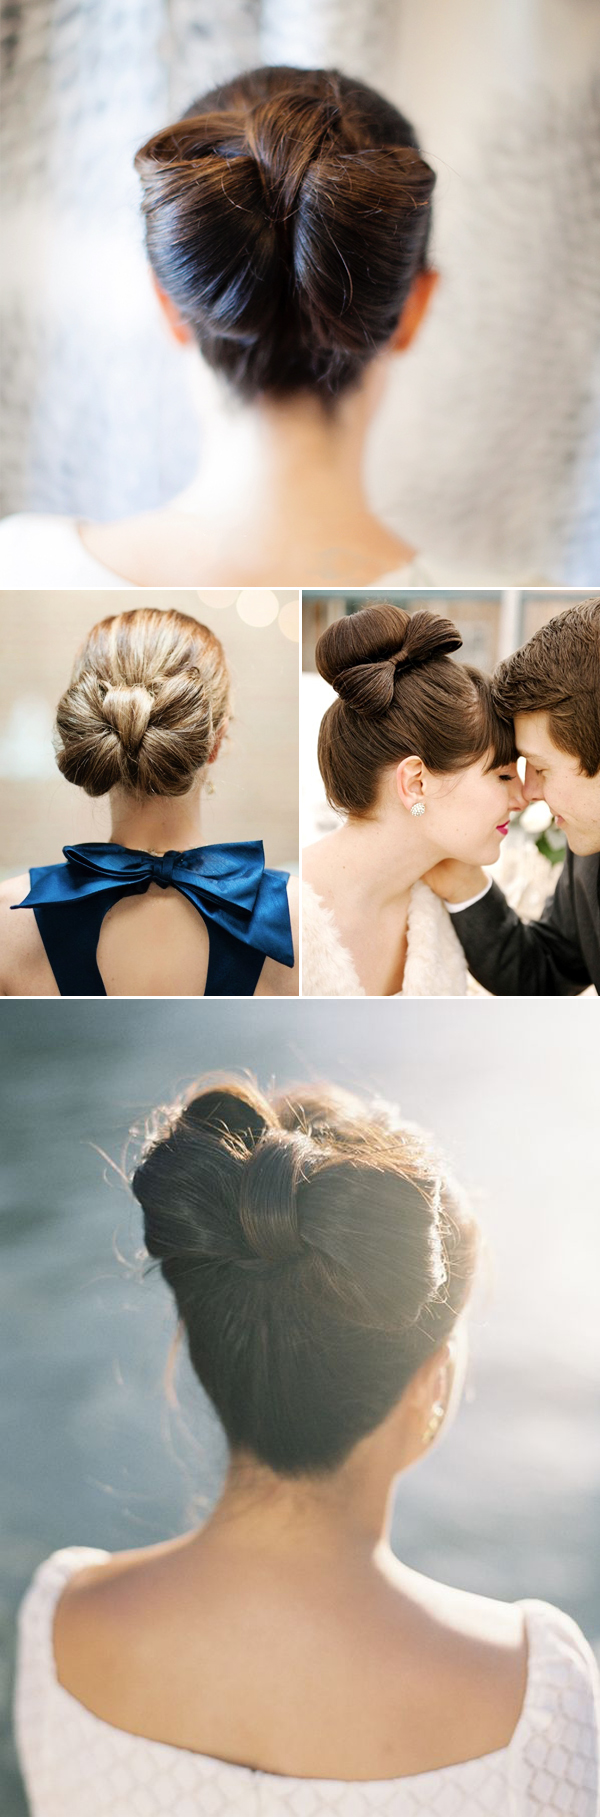 updo04-bow